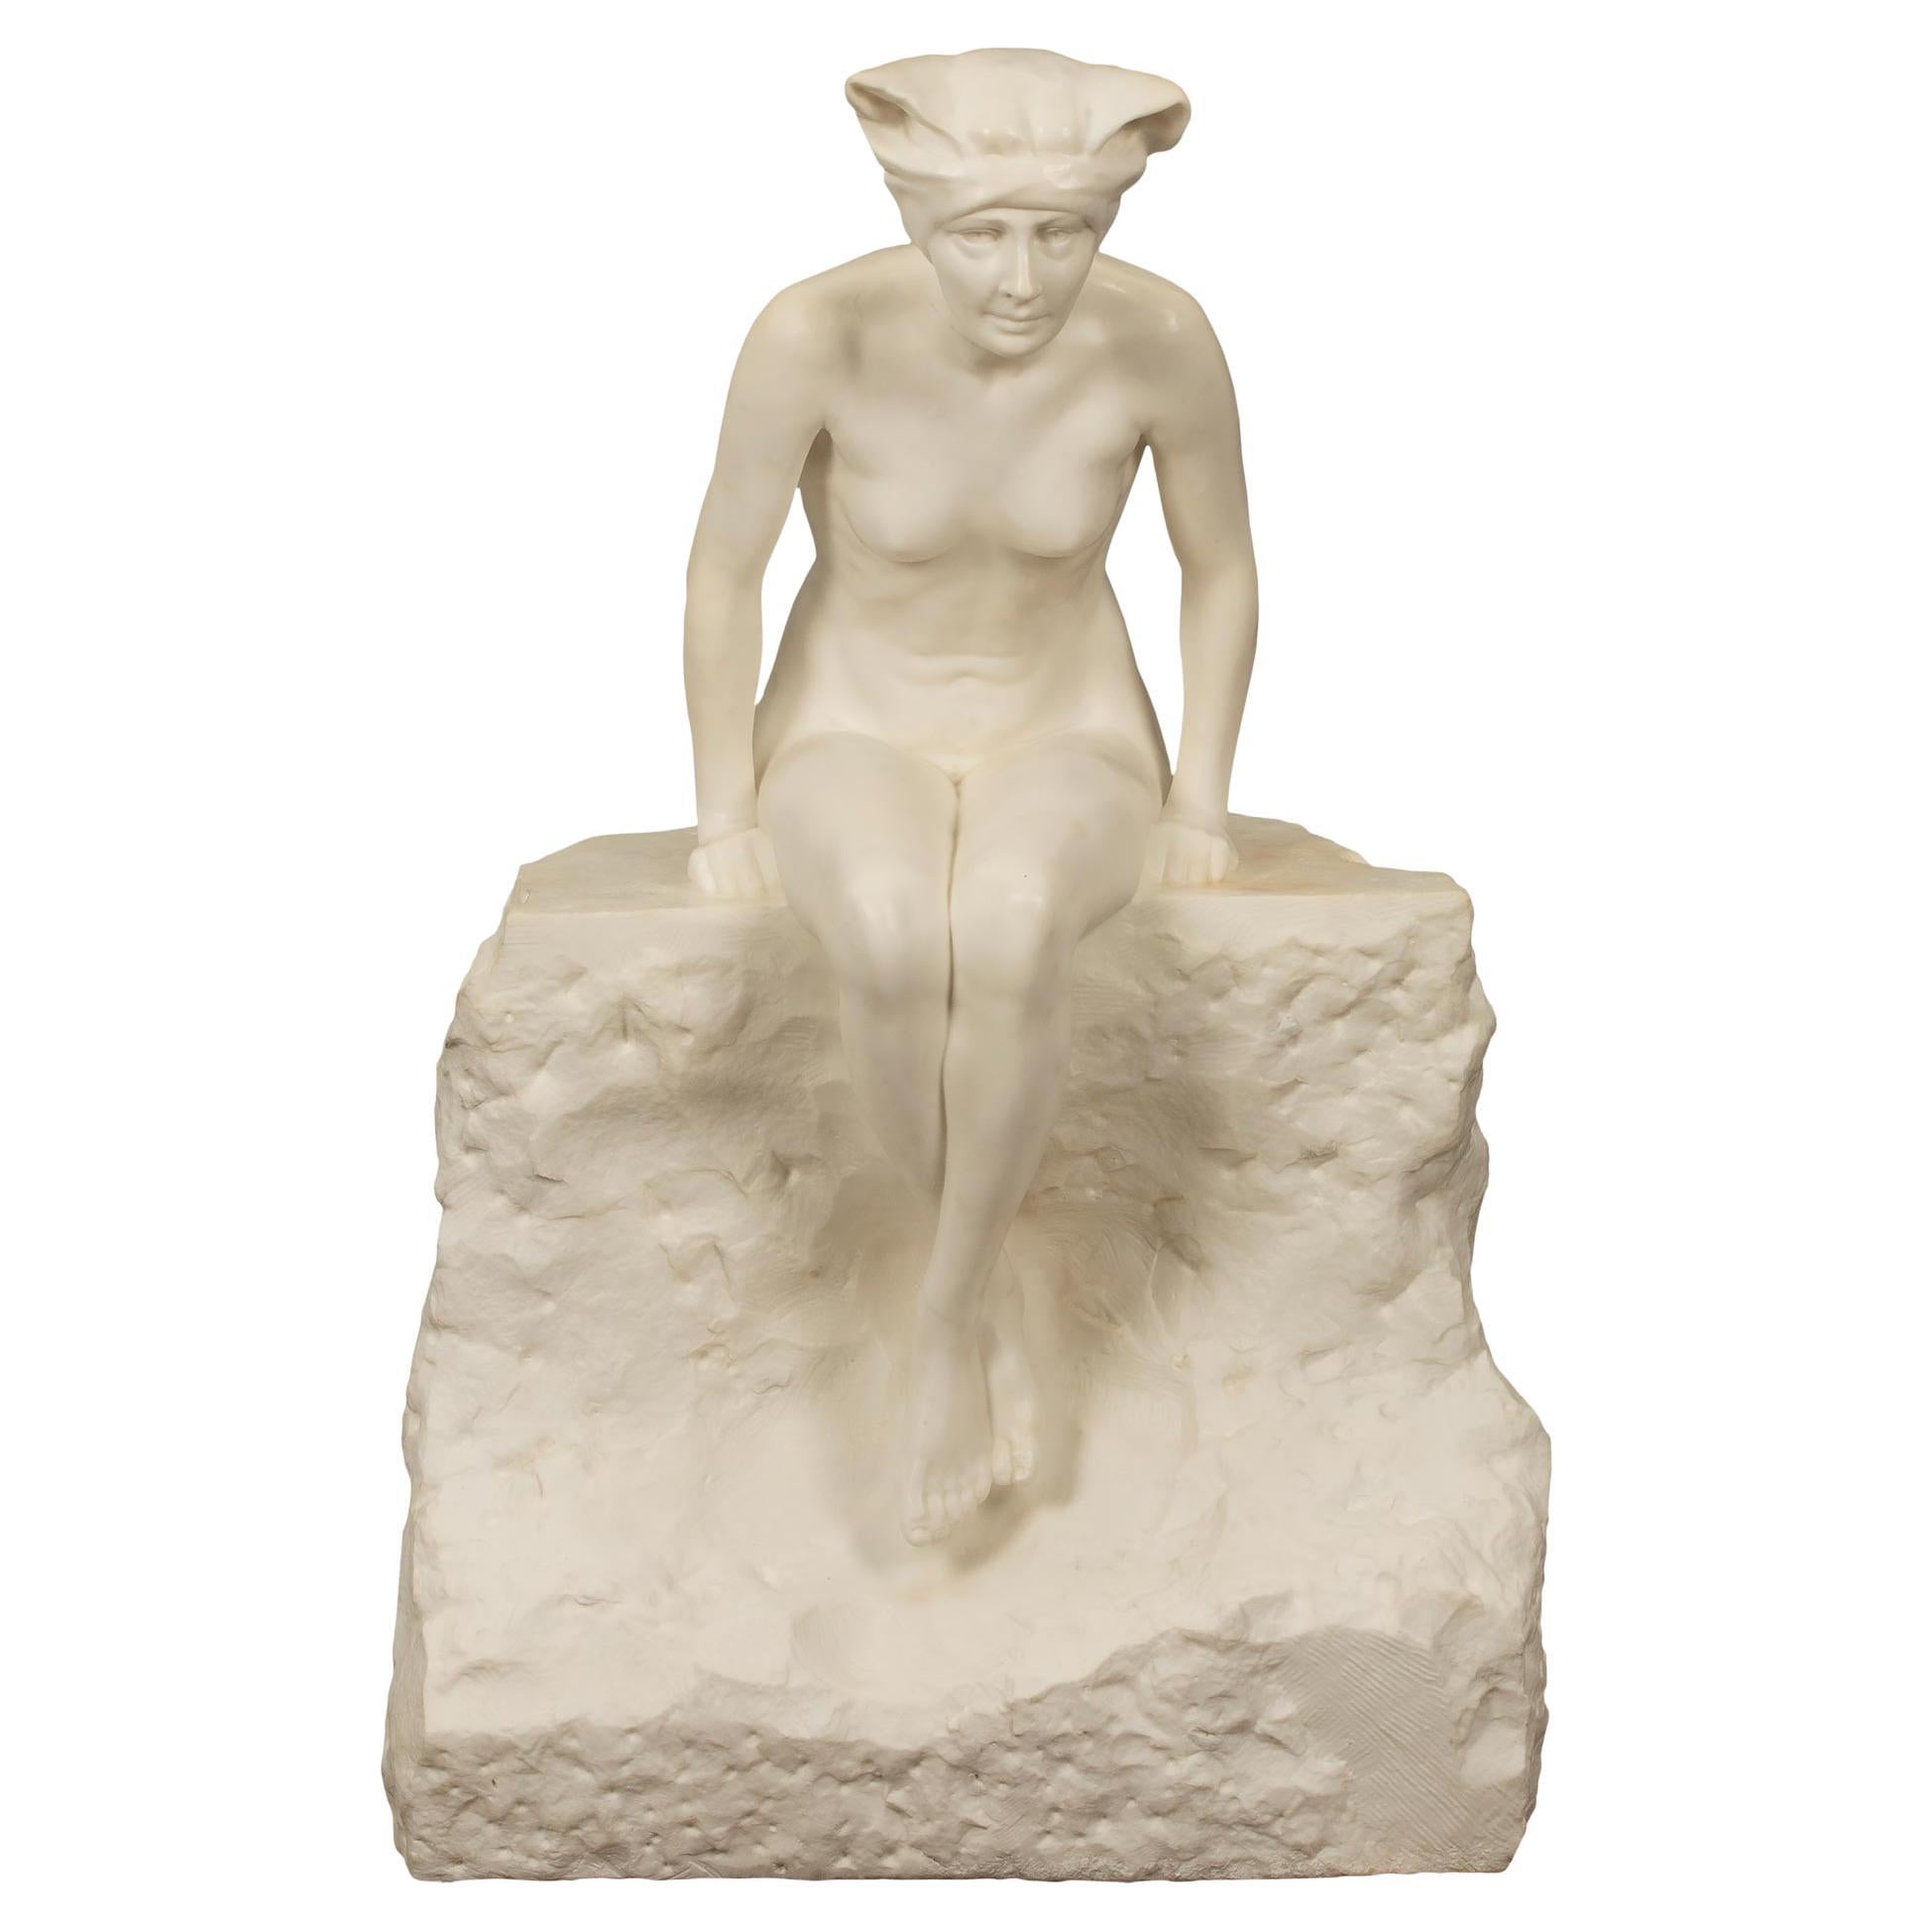 Italian 19th Century White Carrara Marble Statue of a Maiden Sitting on a Rock